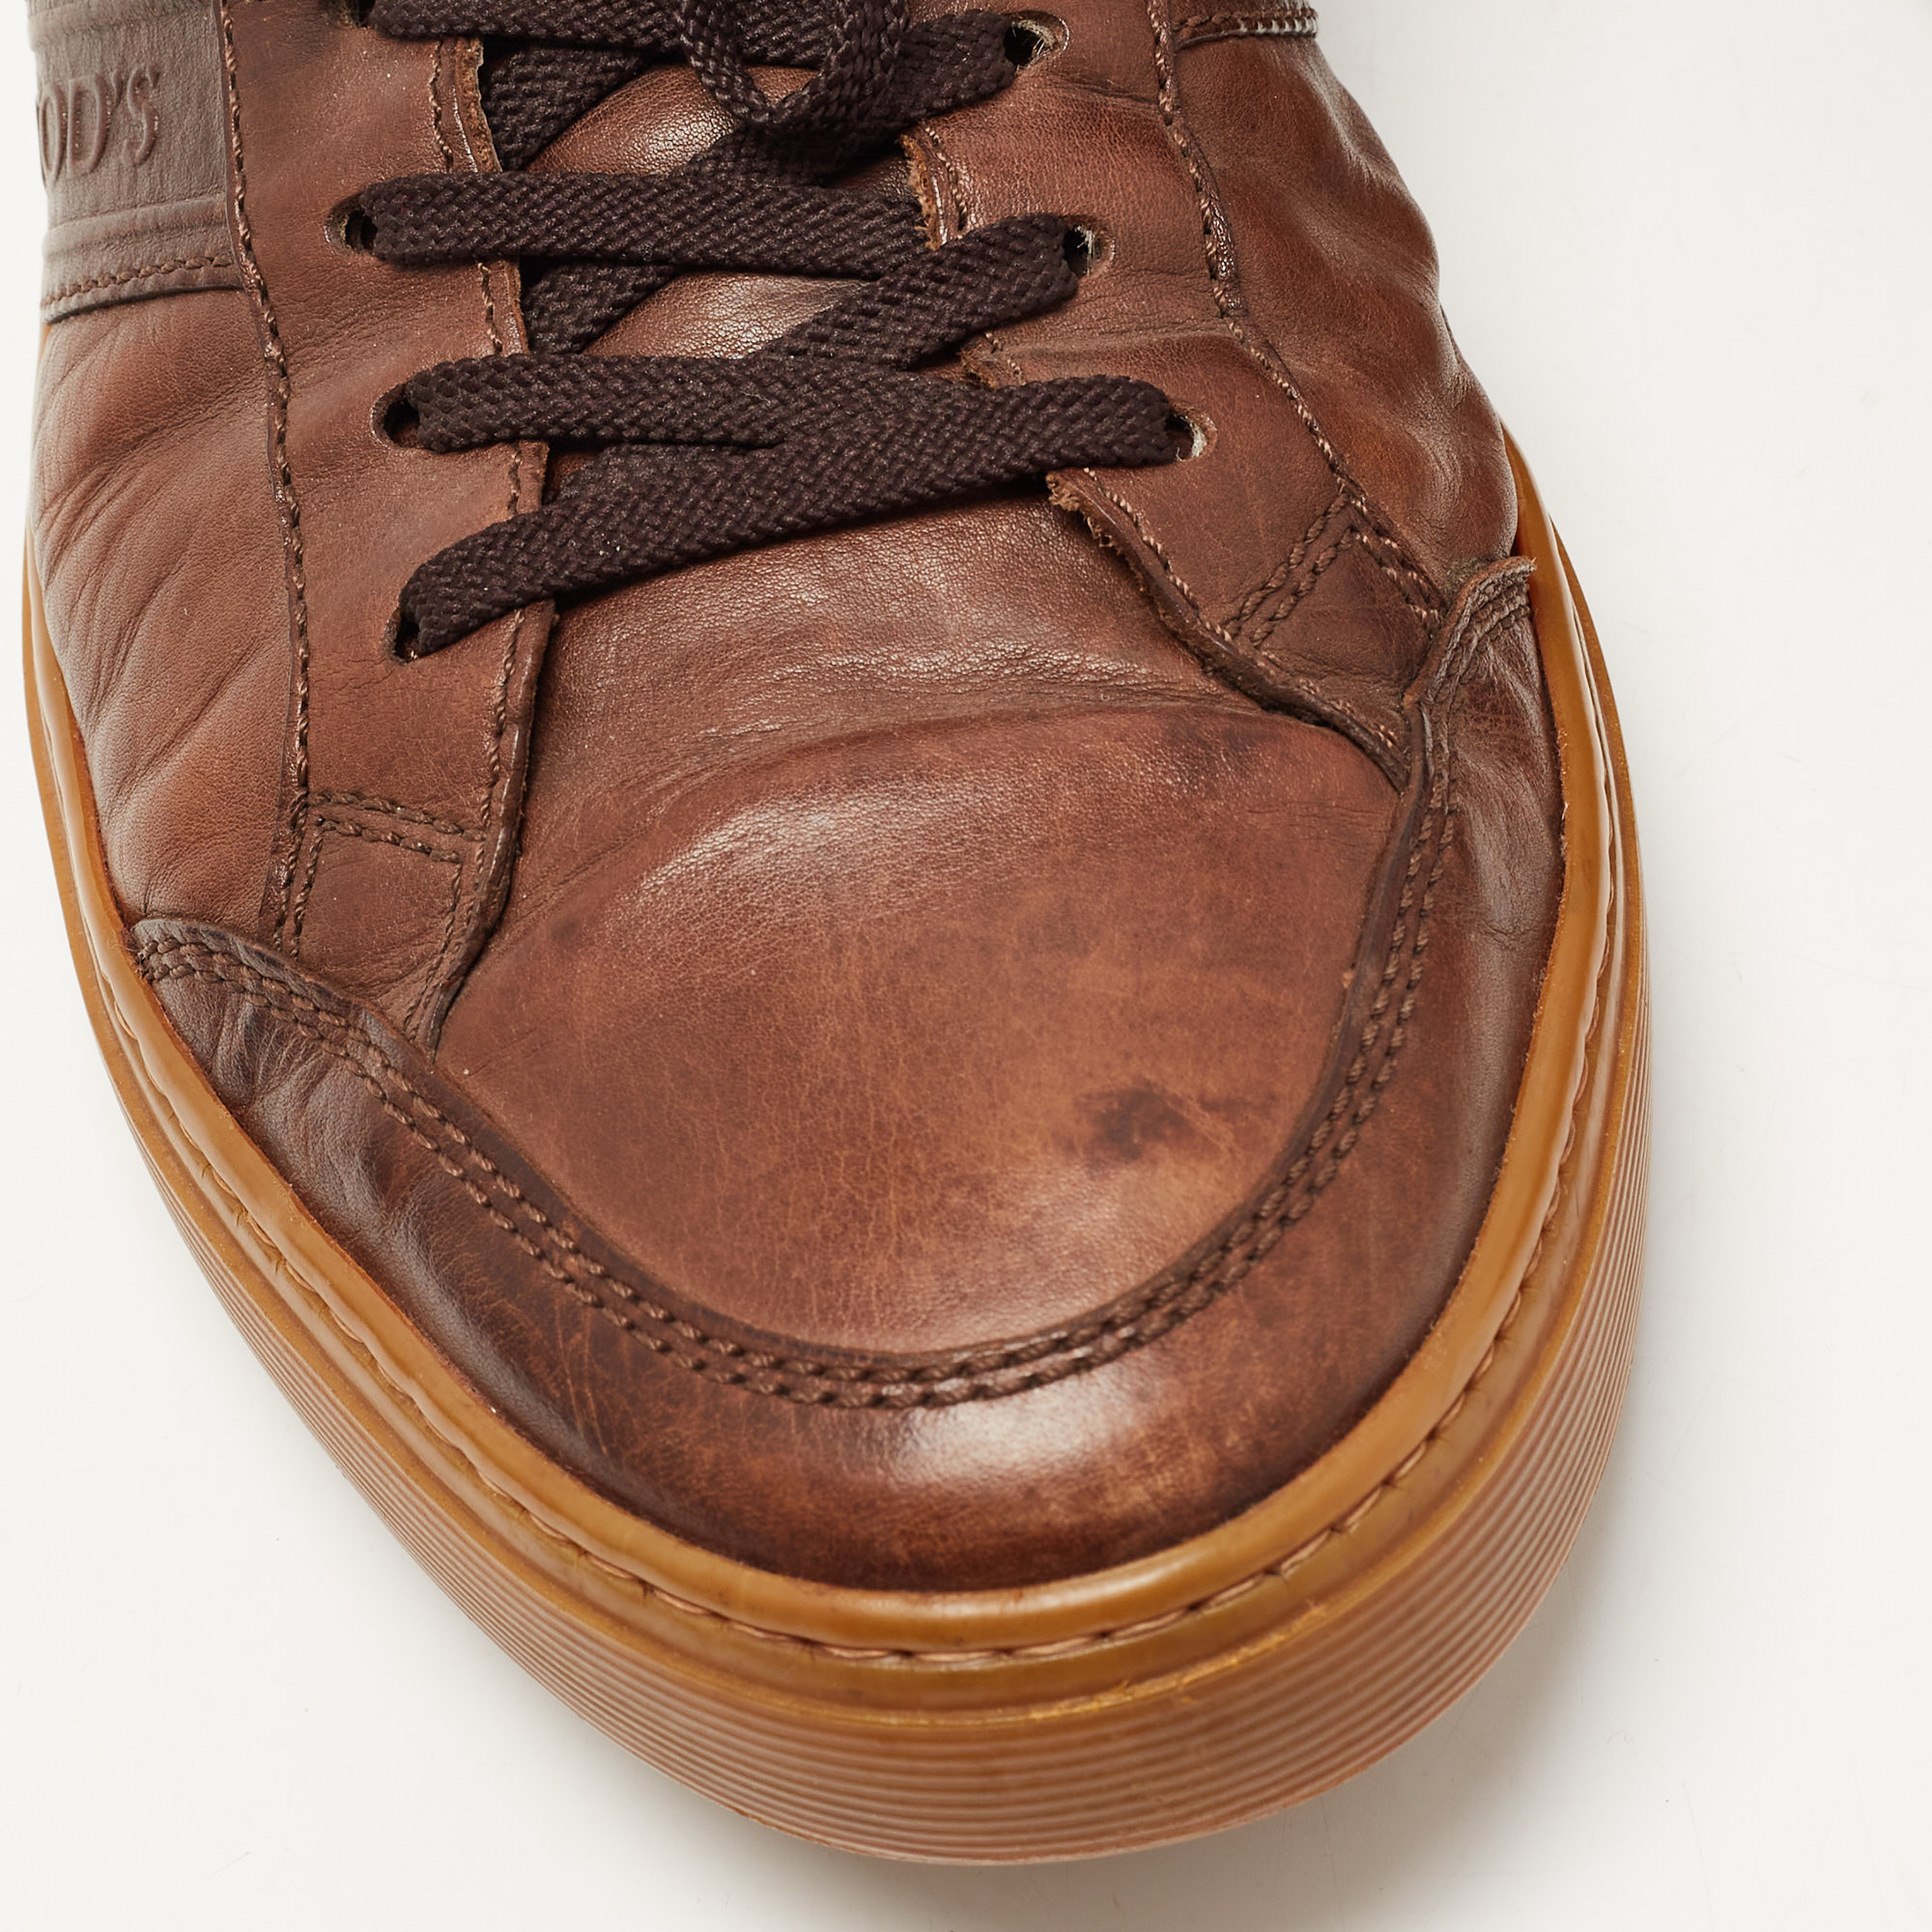 Tod's Brown Leather Lace Up Sneakers Size 43